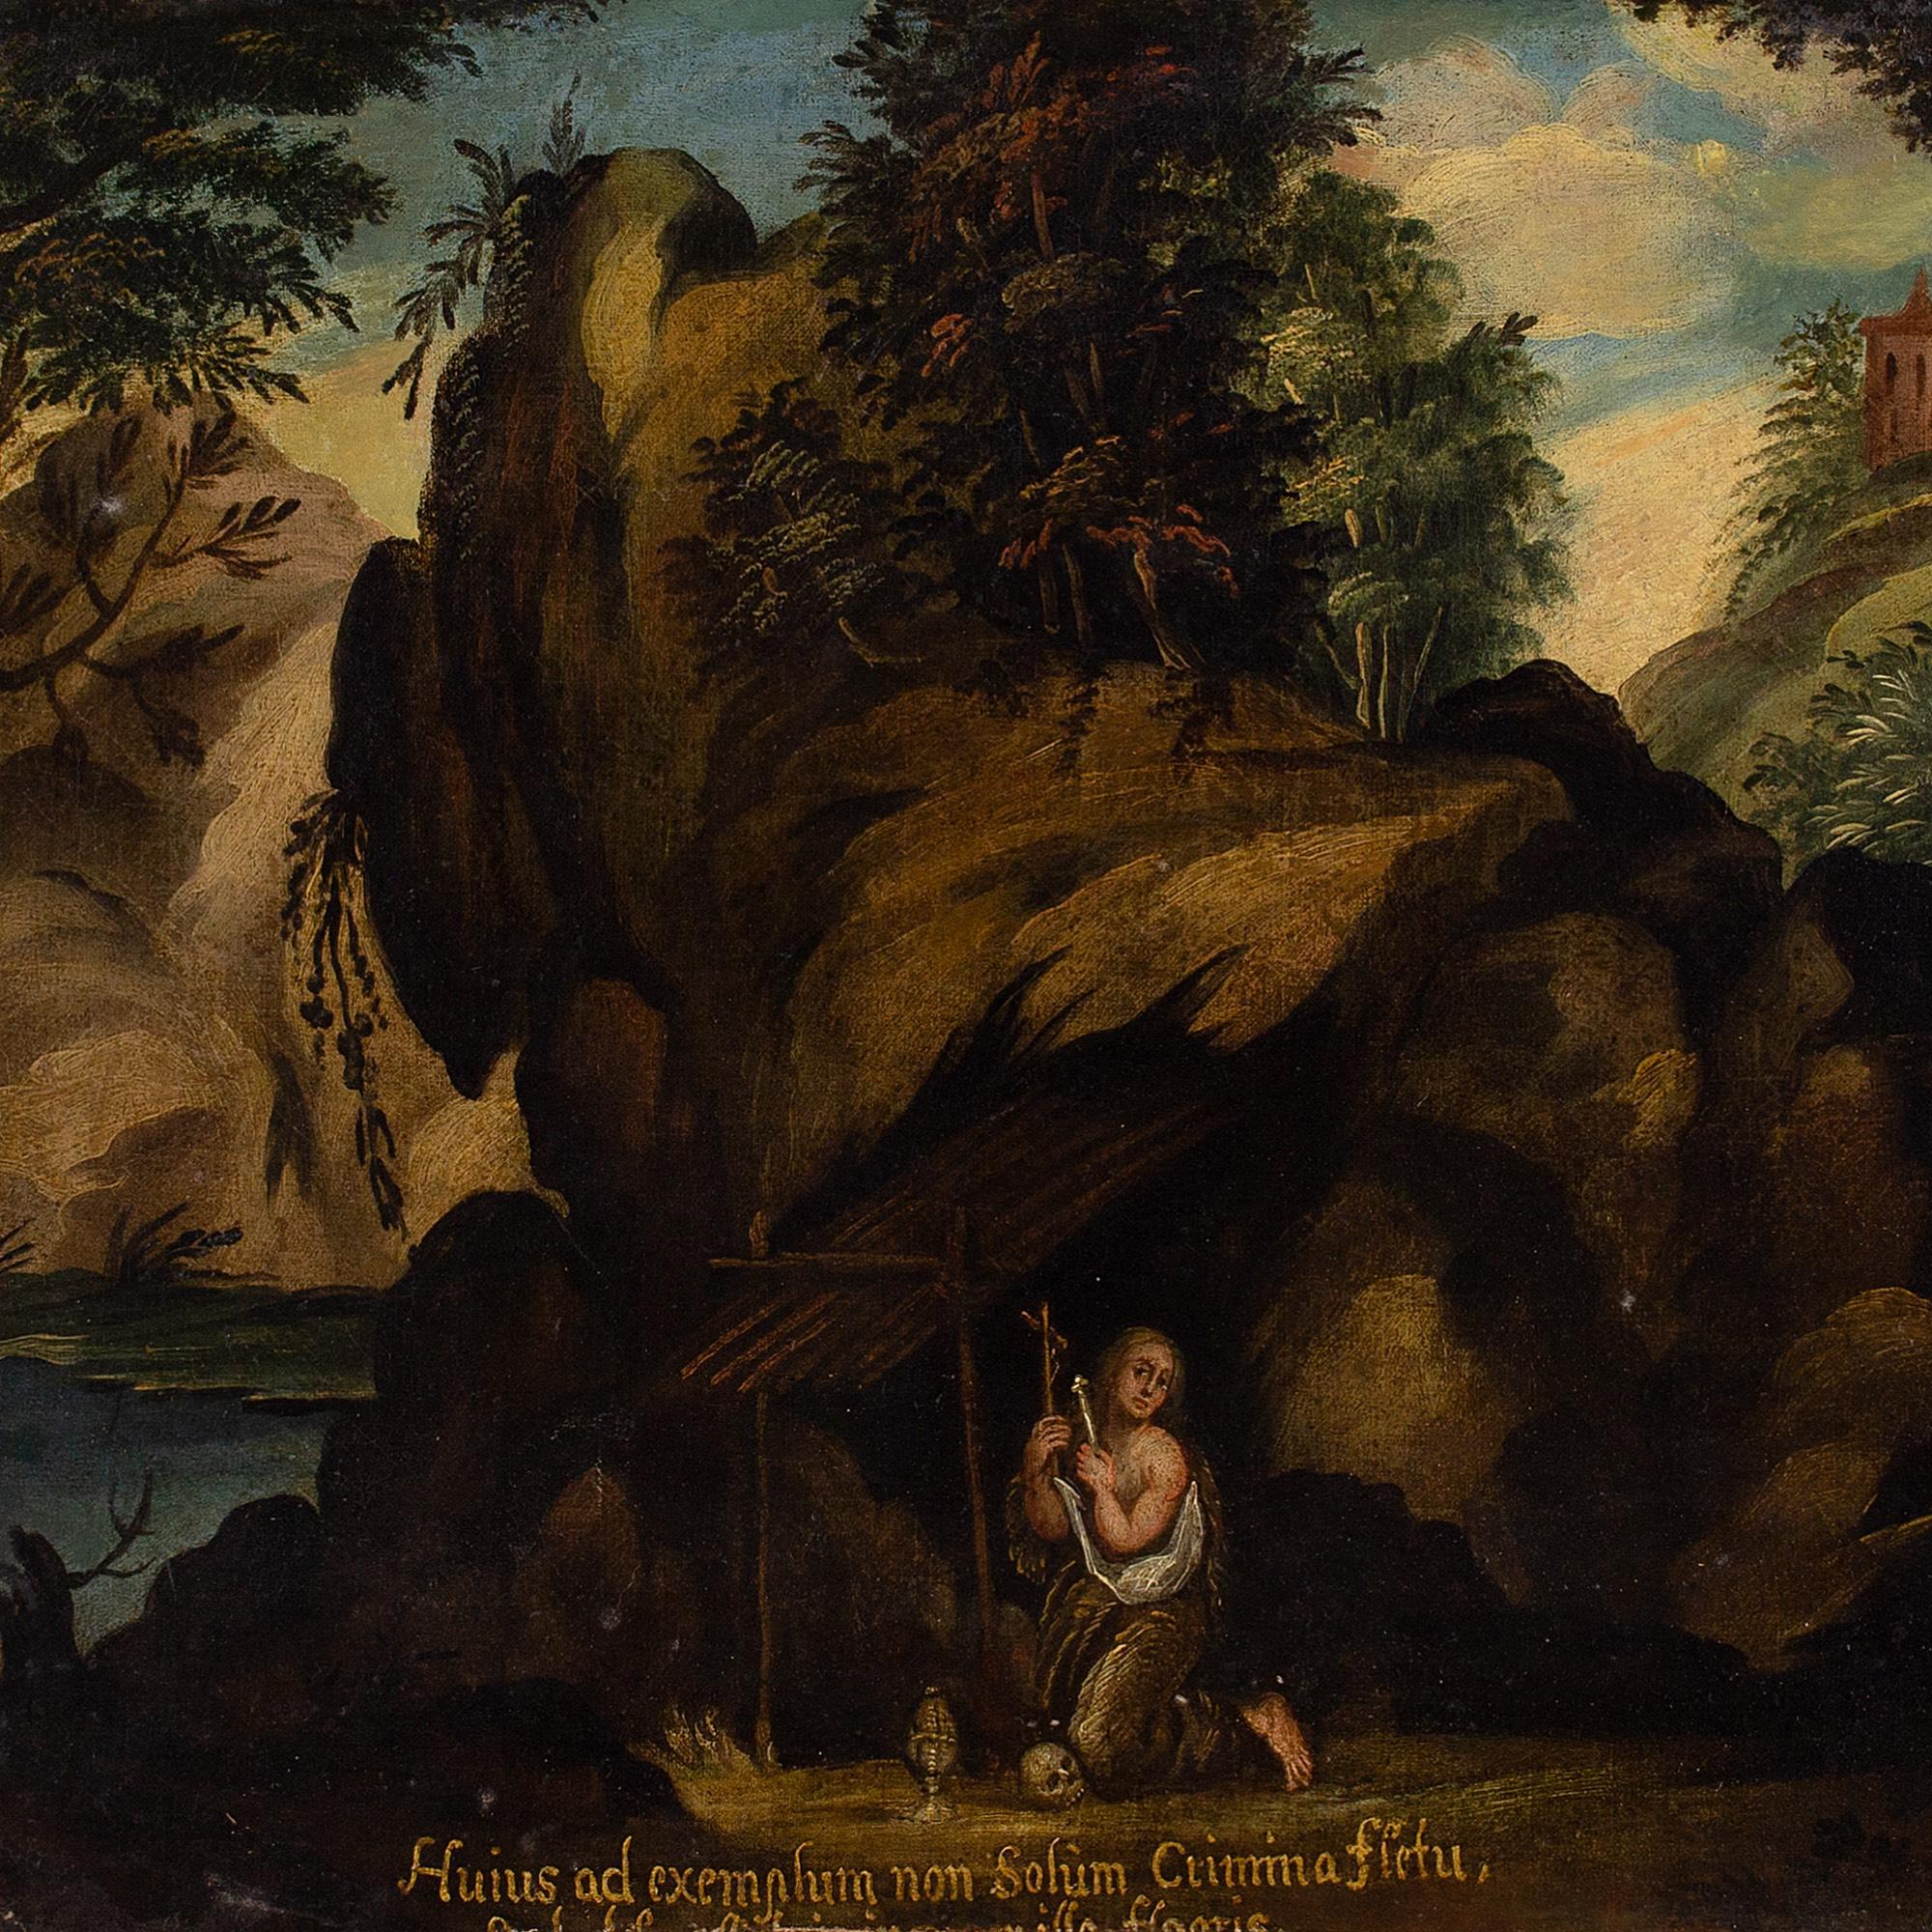 This 18th-century oil painting depicts the penitent Mary Magdalene before a cave dwelling and mountainous scenery. She’s kneeling, as if in prayer, and looks directly at the viewer. It's an allegory of repentance.

The story of Mary Magdalene stems